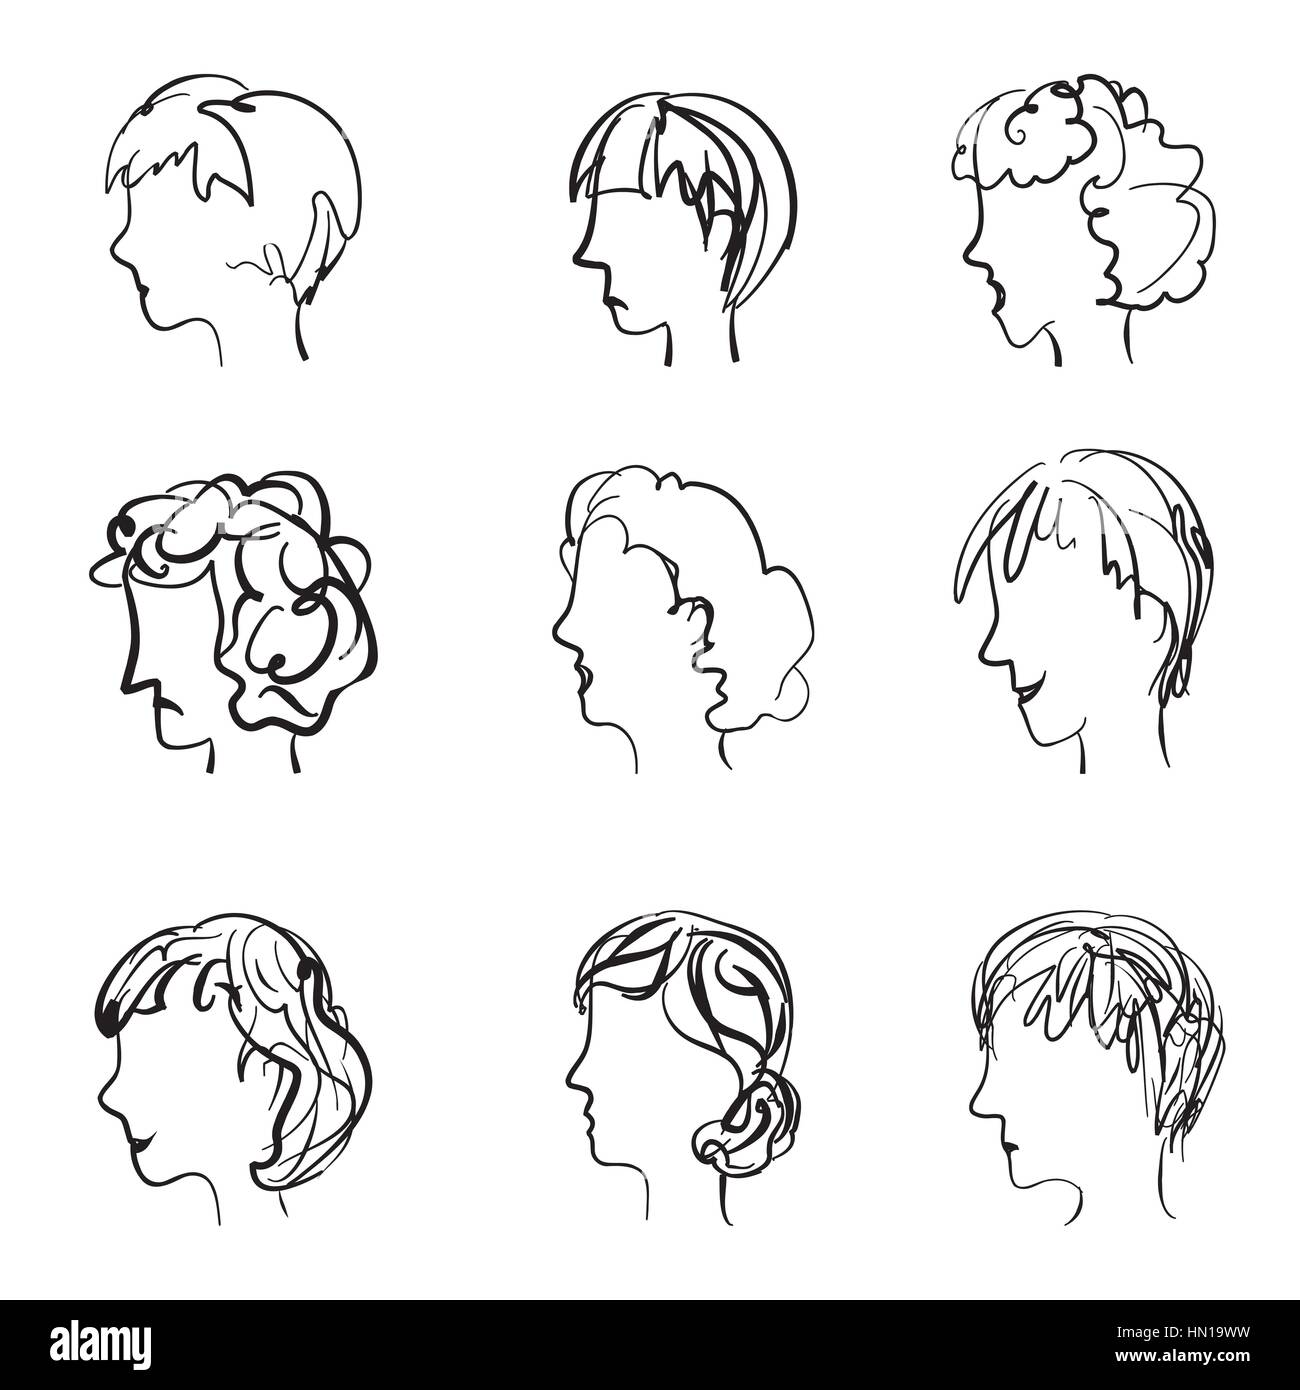 Faces profile with different expressions in retro sketch style. 9 facial expressions set Stock Vector